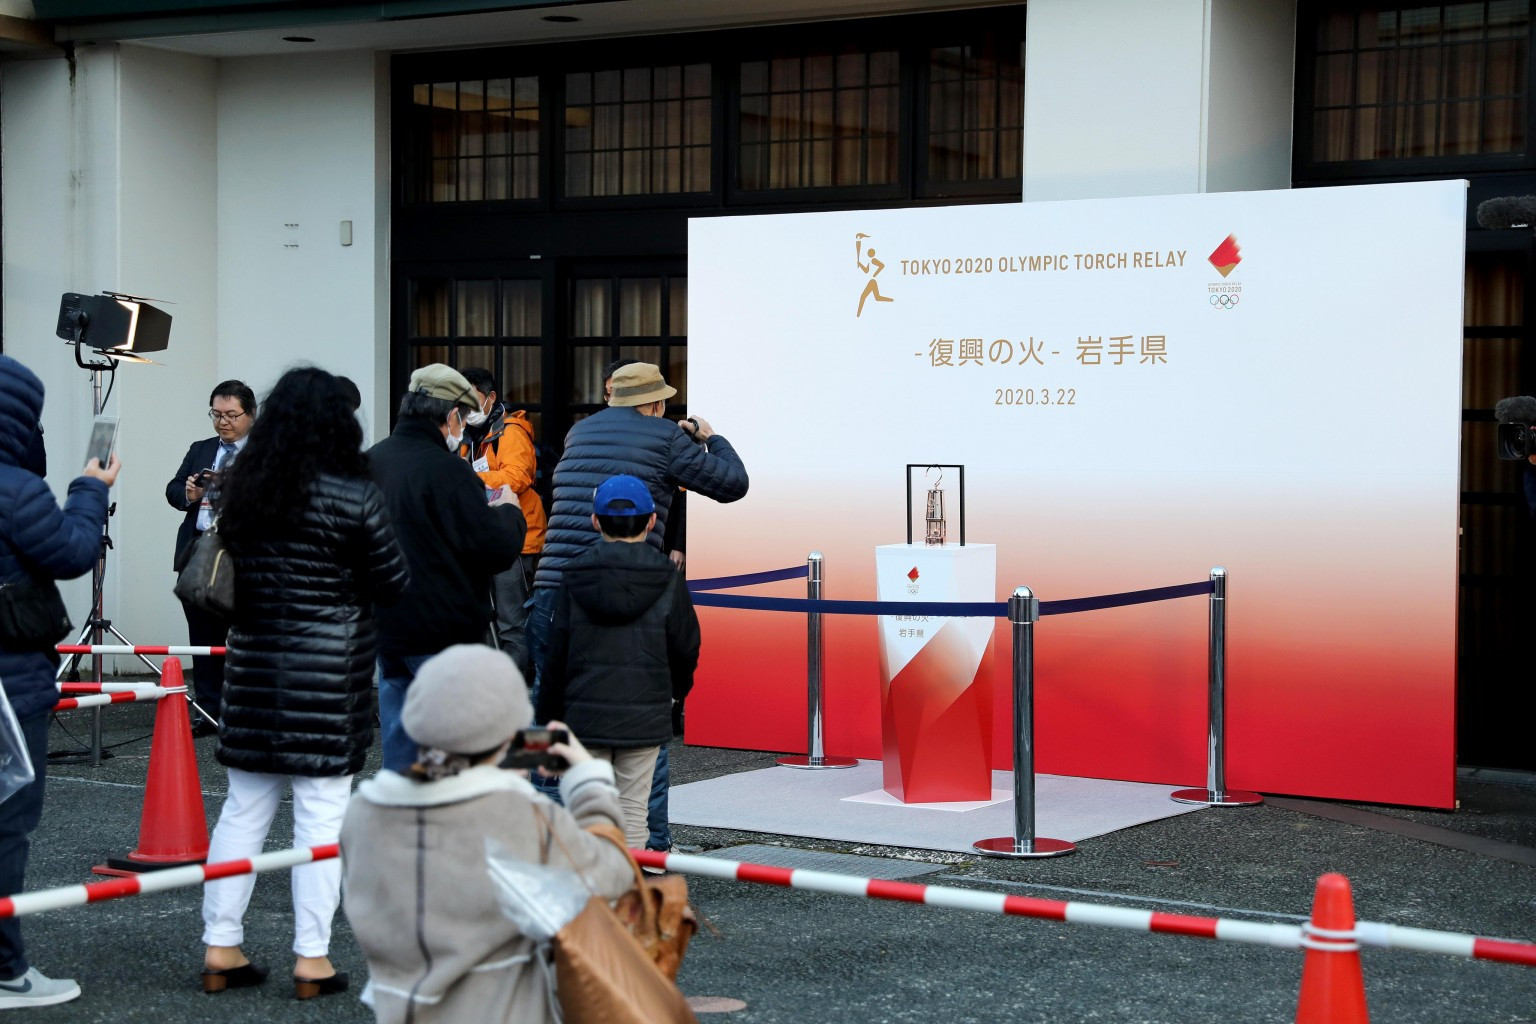 The Olympic Flame is being displayed in Tokyo next month following the postponement of the Tokyo 2020 Games ©Tokyo 2020